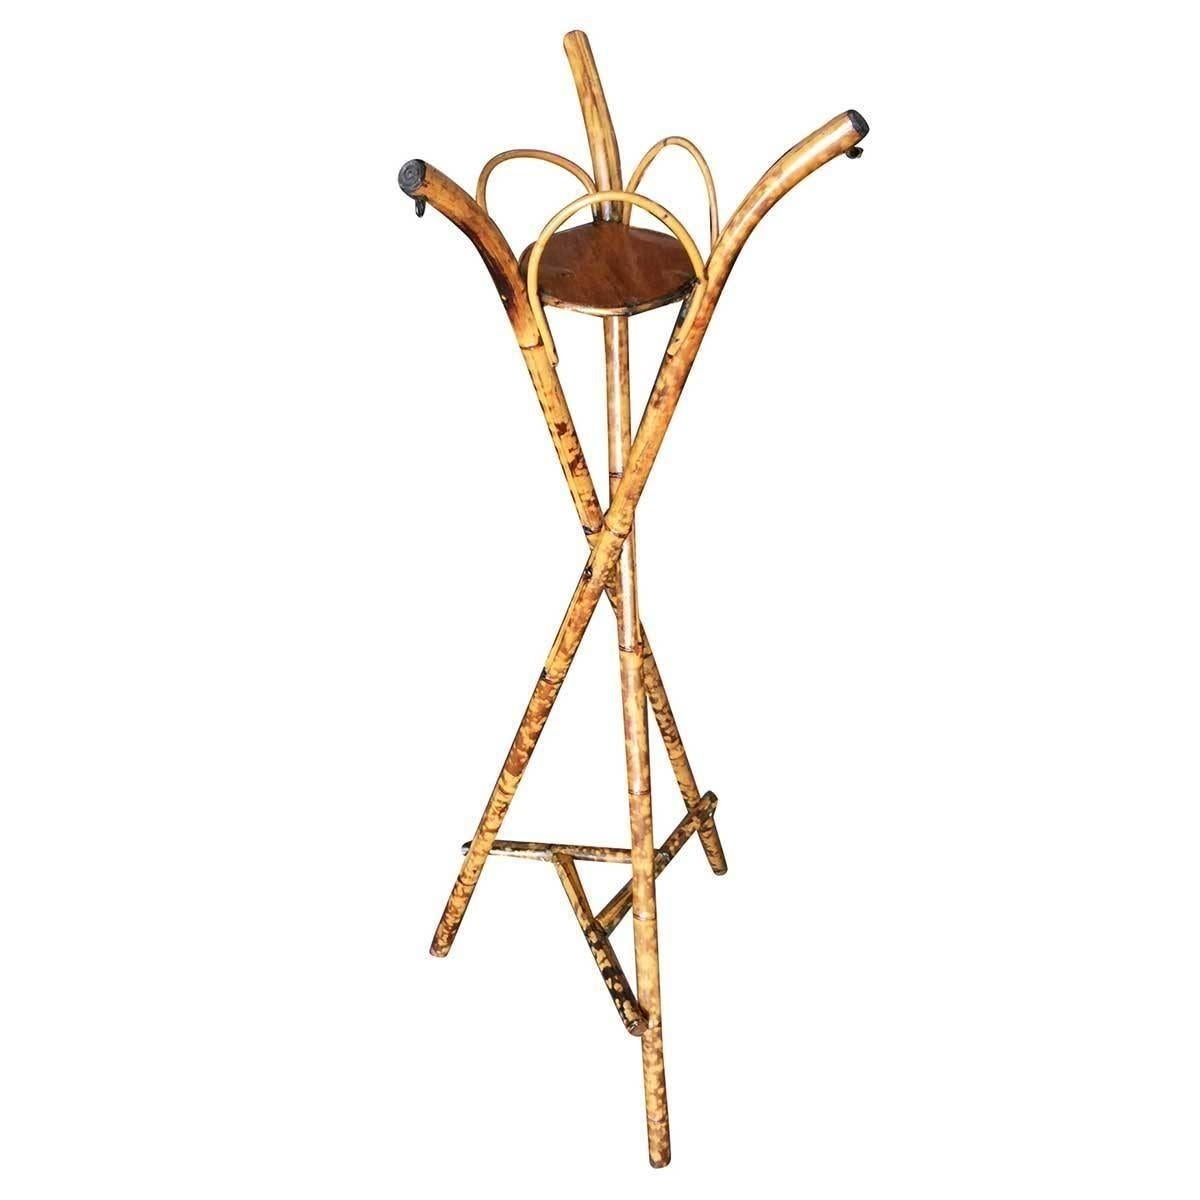 Late Victorian tripod plant stands featuring three crossing Tiger Bamboo legs with a single small circular wood shelf. An extremely charming and rare piece.
Designed in the manner of Paul Frankl.
1900,
Restored to new for you.
We only purchase and